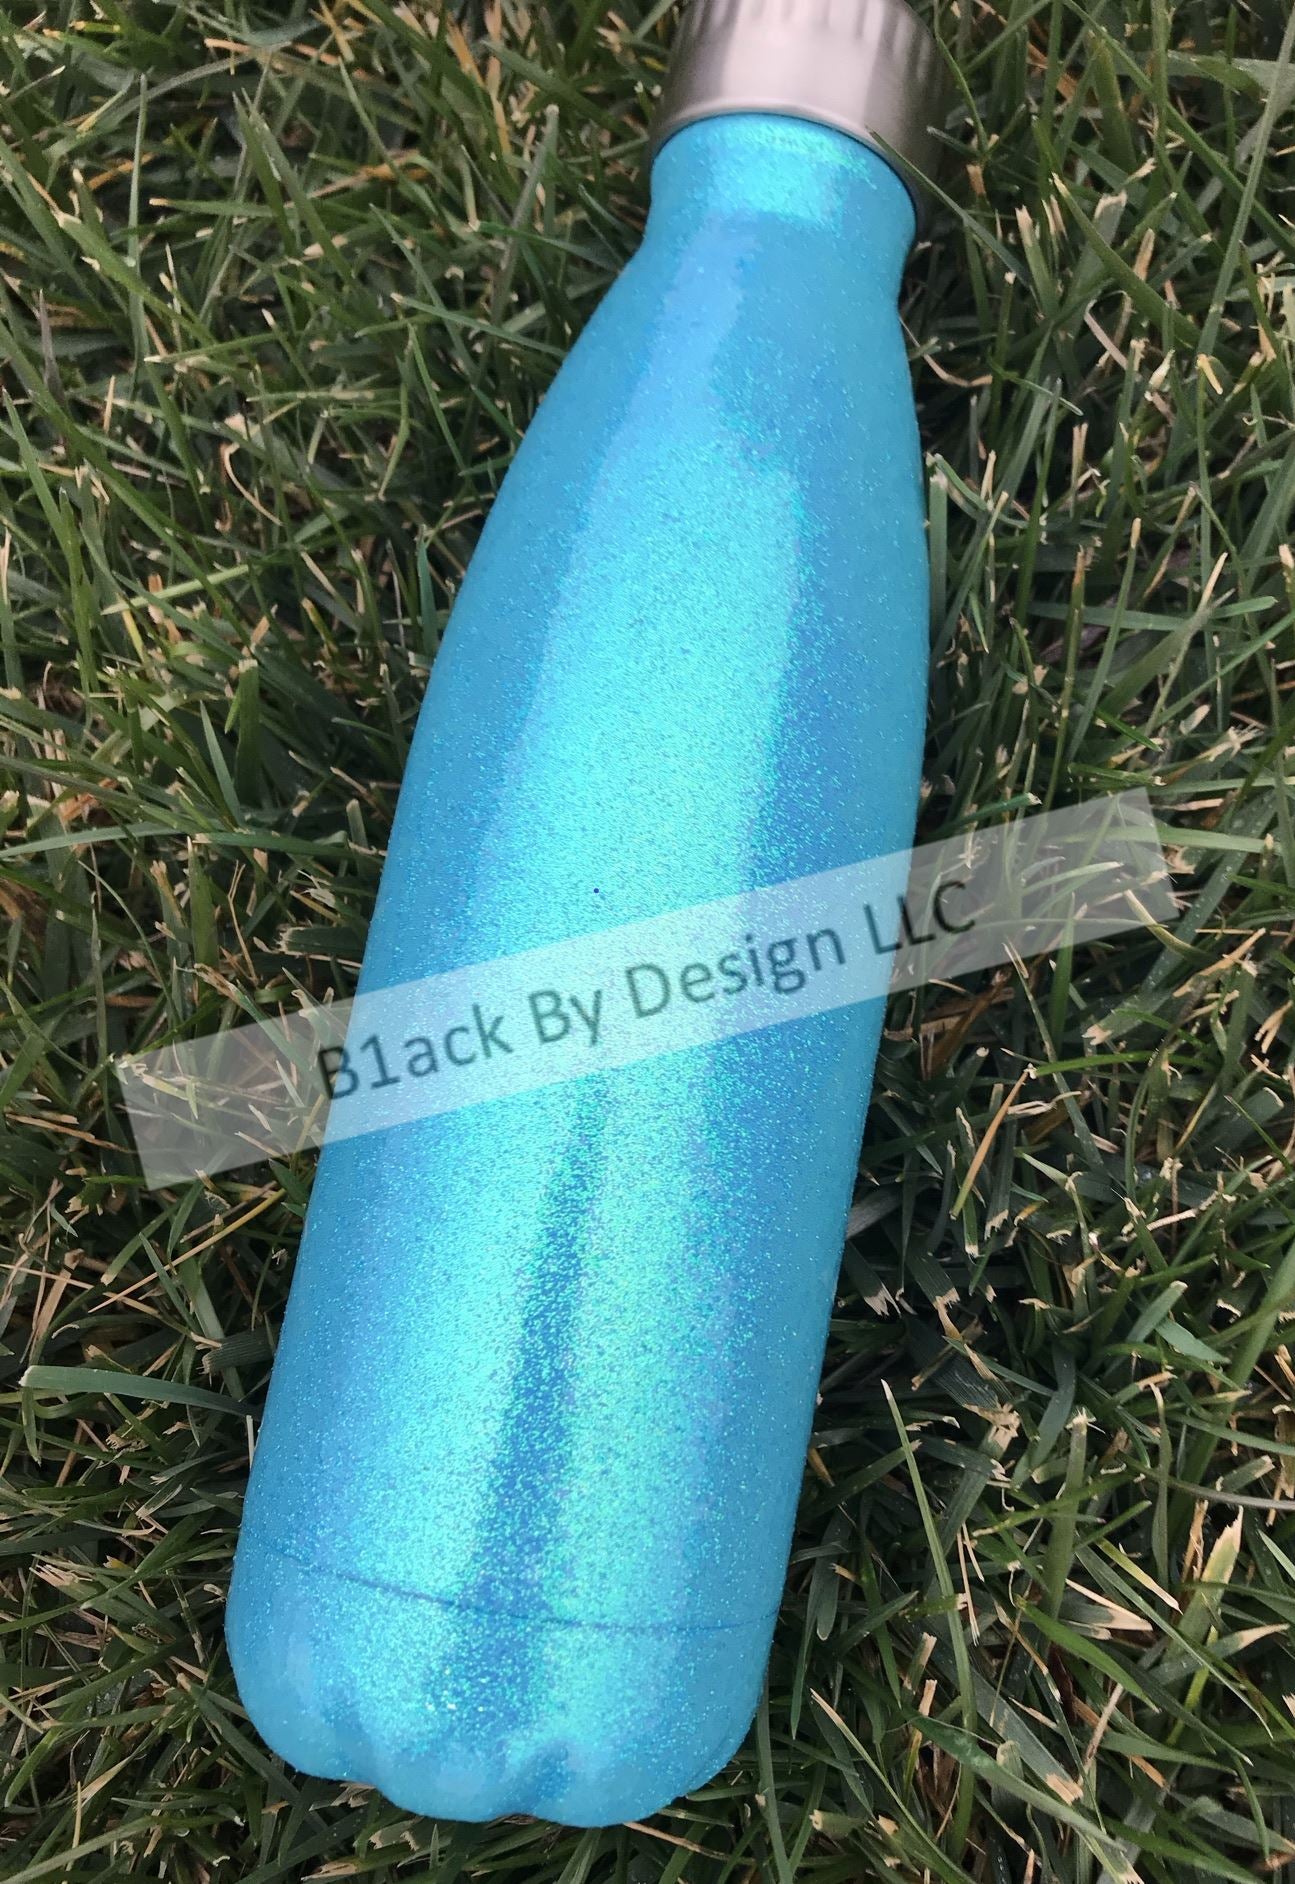 Stainless Steel Water Bottle Water Bottle B1ack By Design LLC Holographic Teal Glitter Glitter Only 